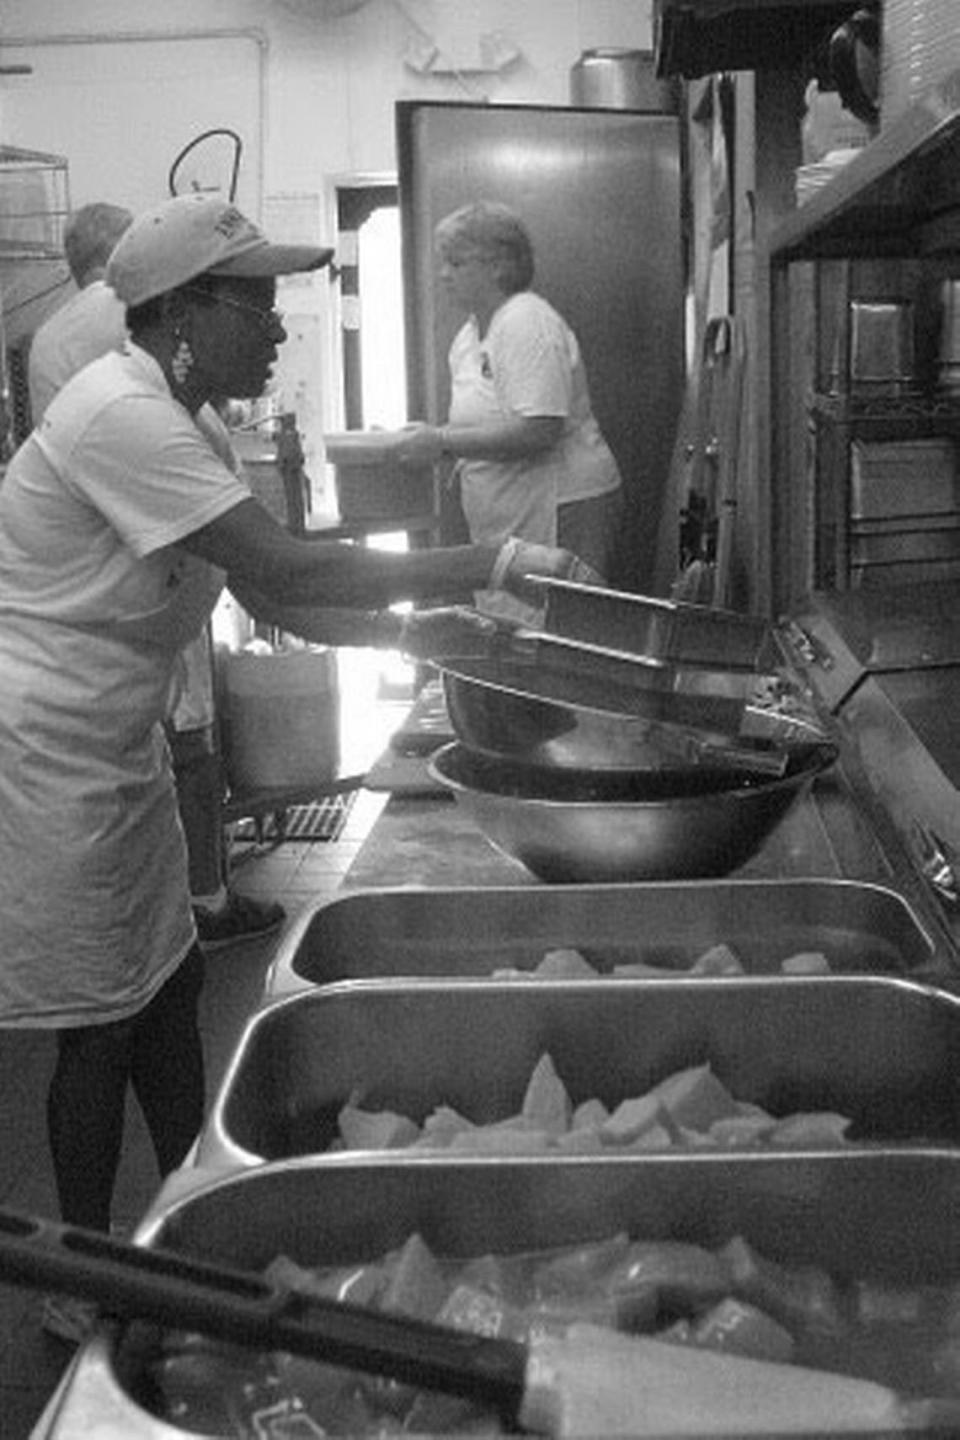 An old photo from inside the kitchen of Mr. Bones BBQ which closed after 30 years in business on Anna Maria Island.